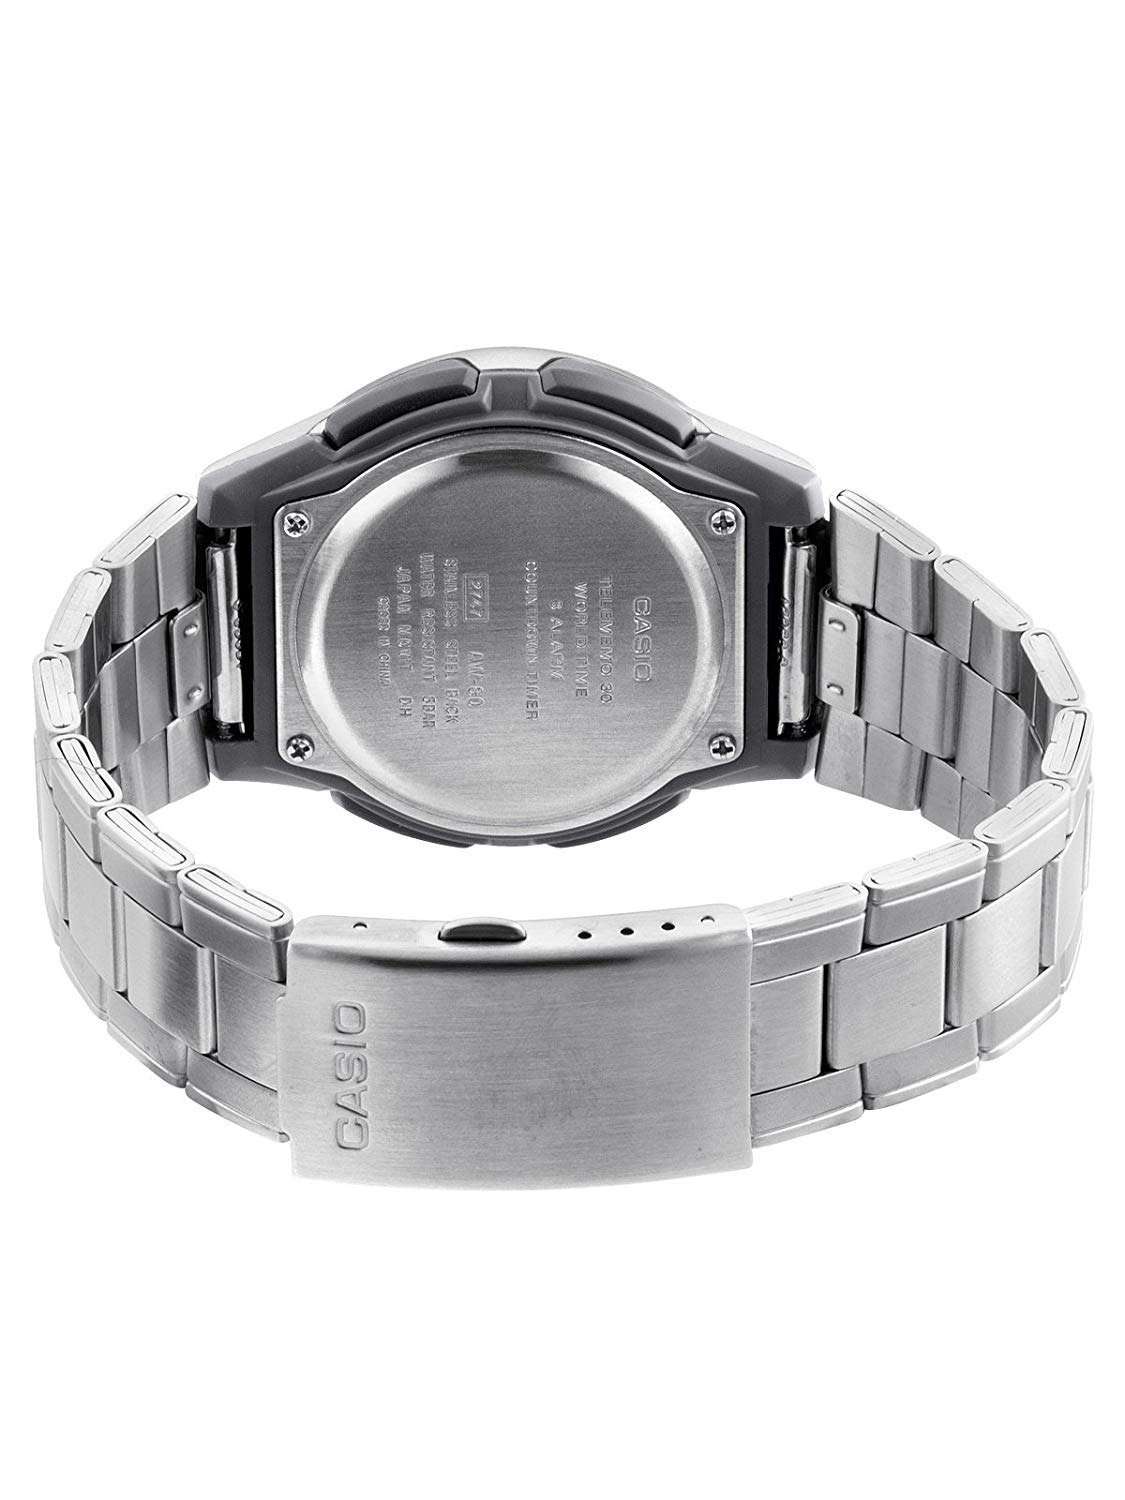 Casio AW-80D-7A2 Silver Stainless Watch for Men-Watch Portal Philippines